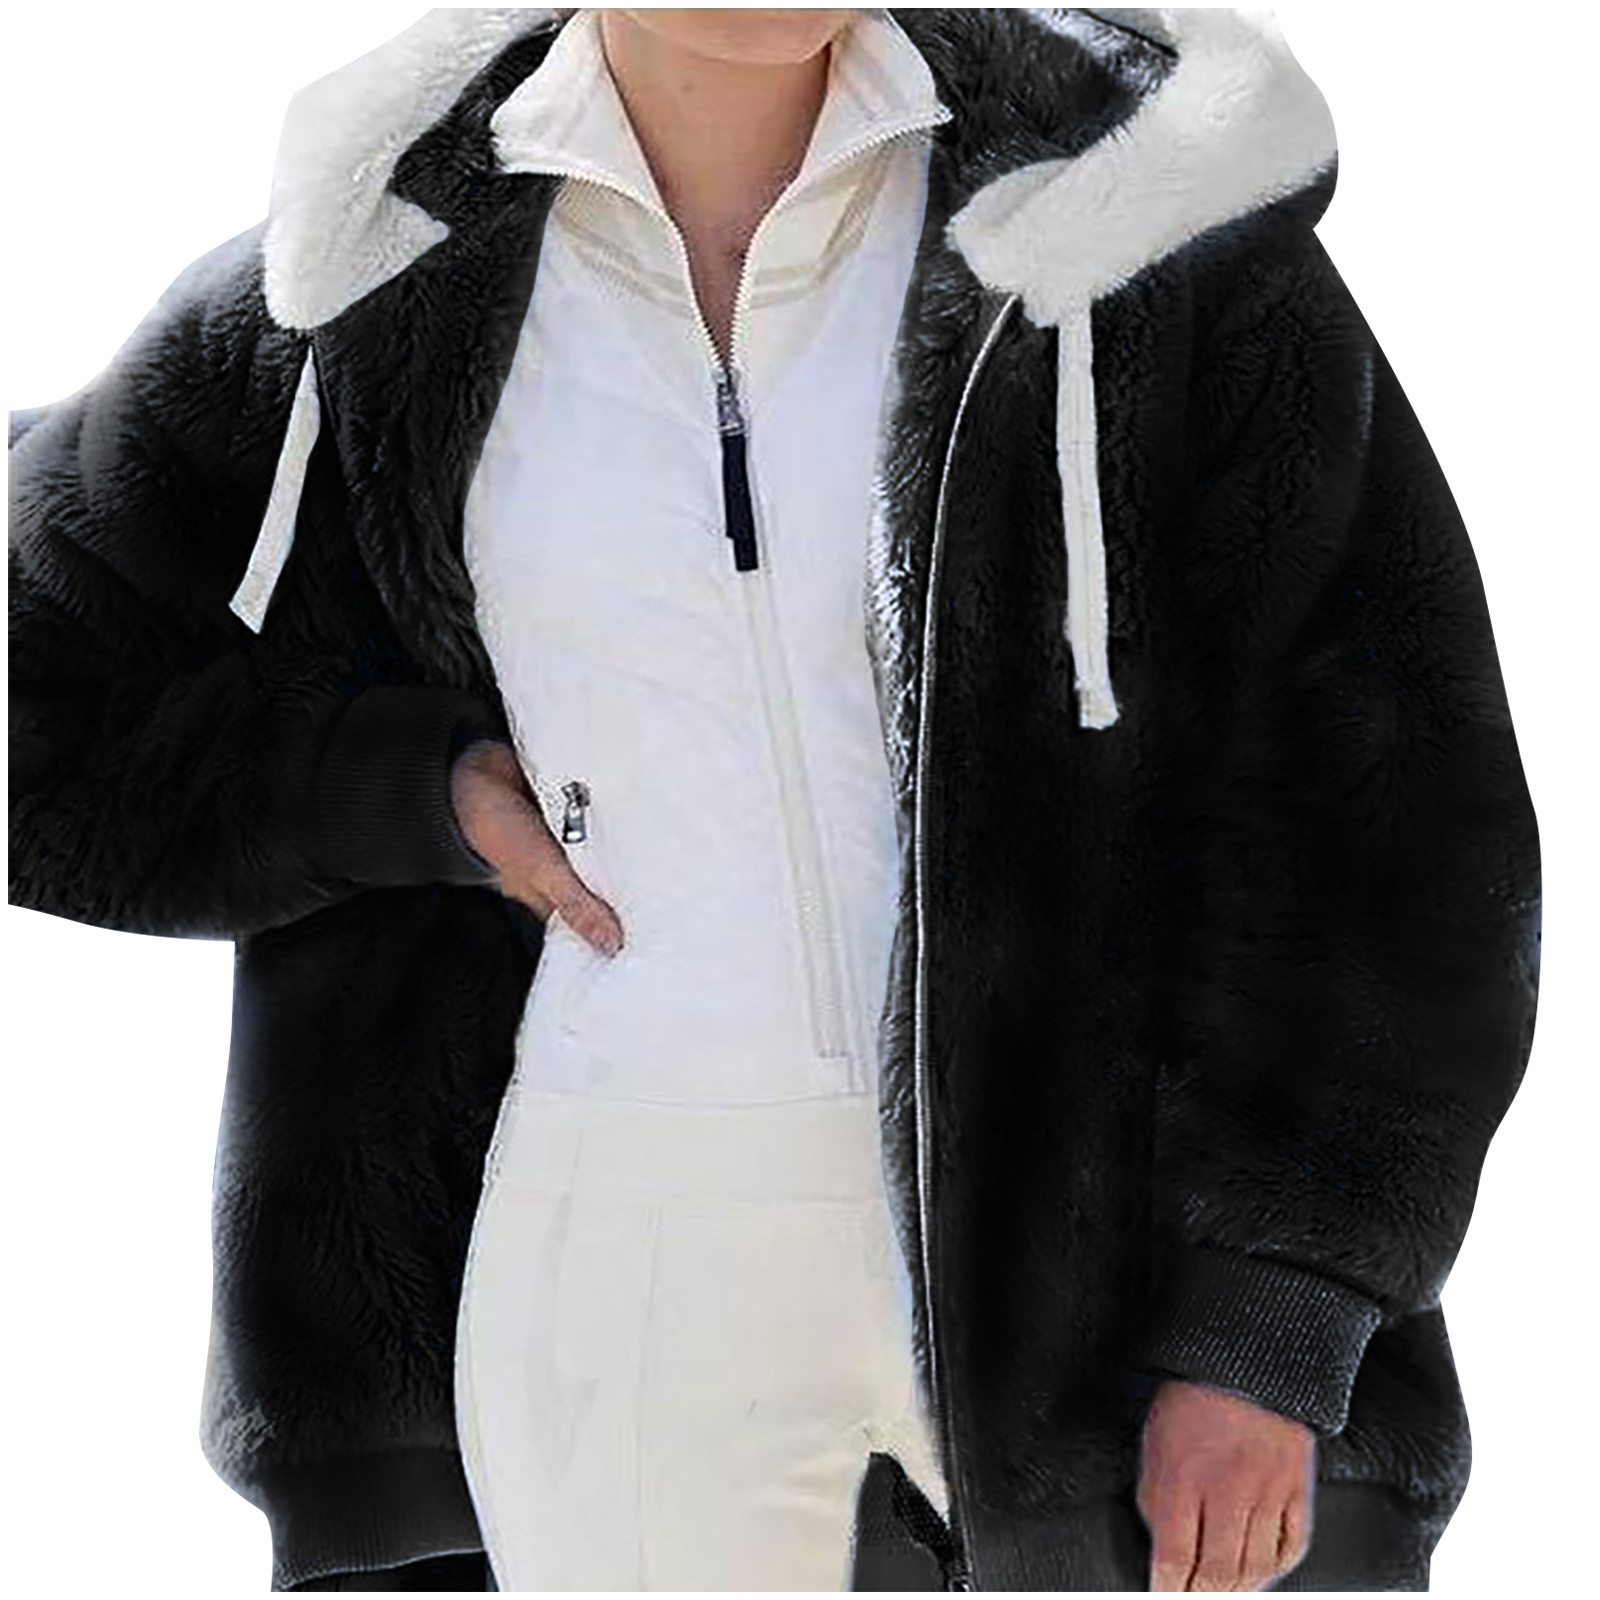 Edvintorg Jackets For Women Casual Clearance Plus Size Winter Warm ...